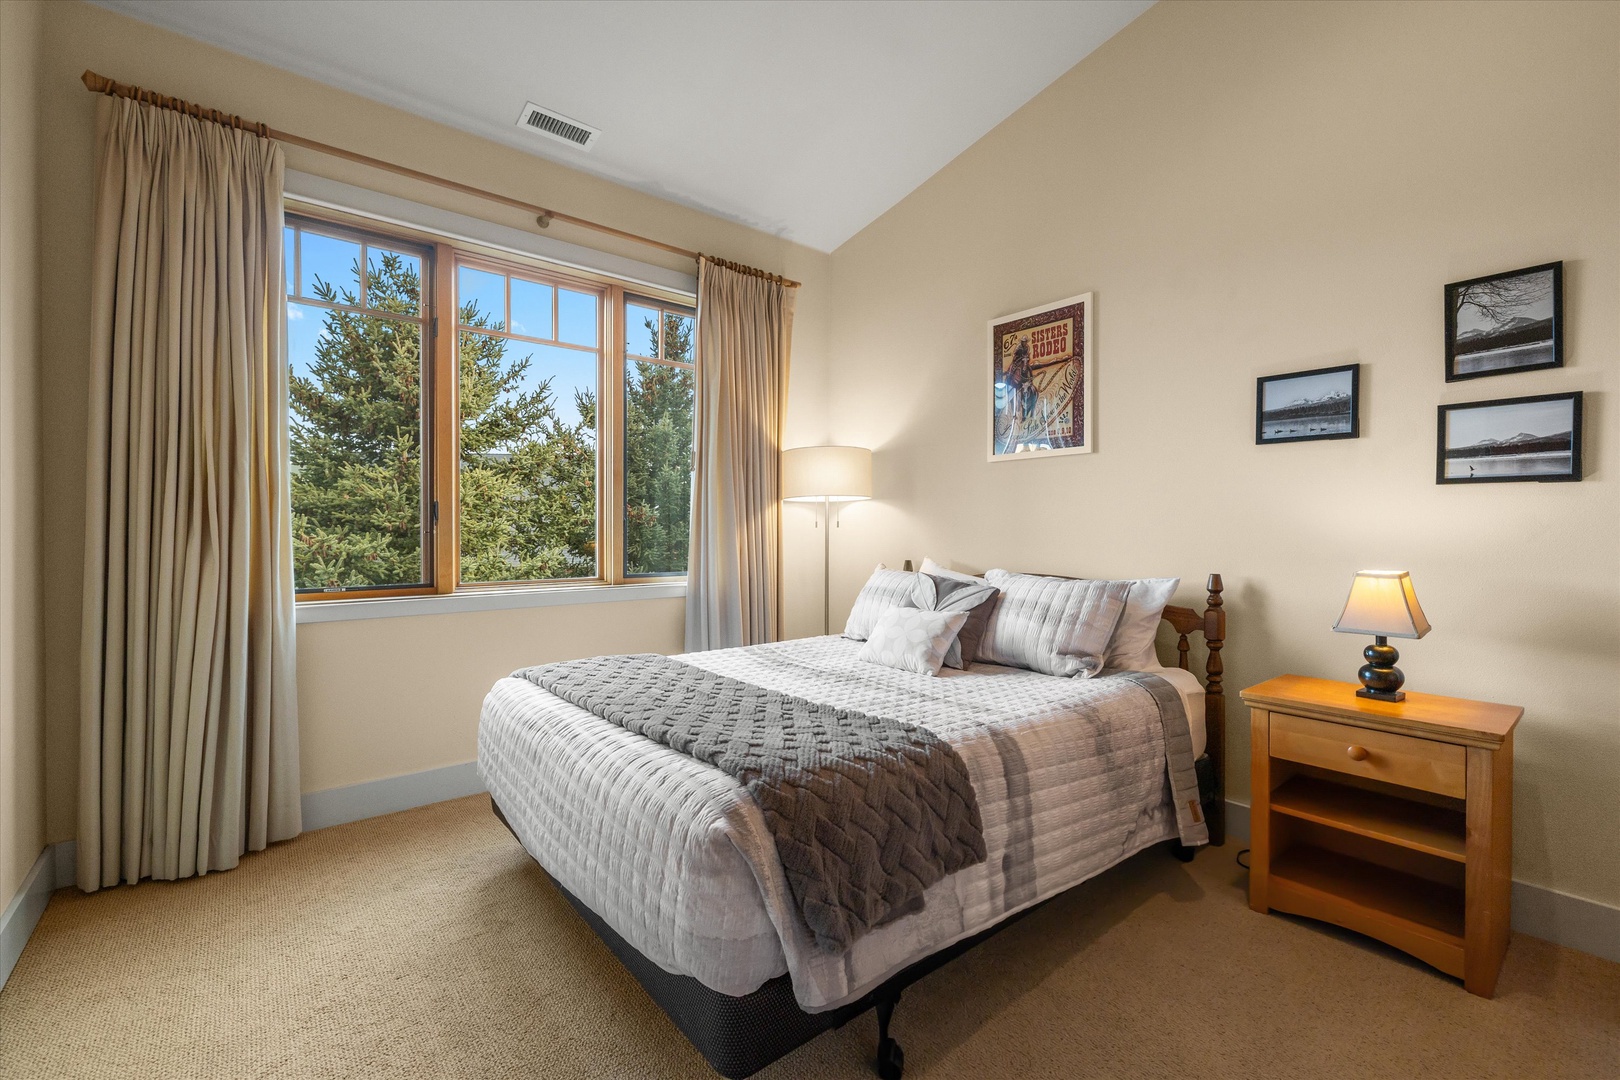 A plush queen-sized bed awaits in the second bedroom retreat